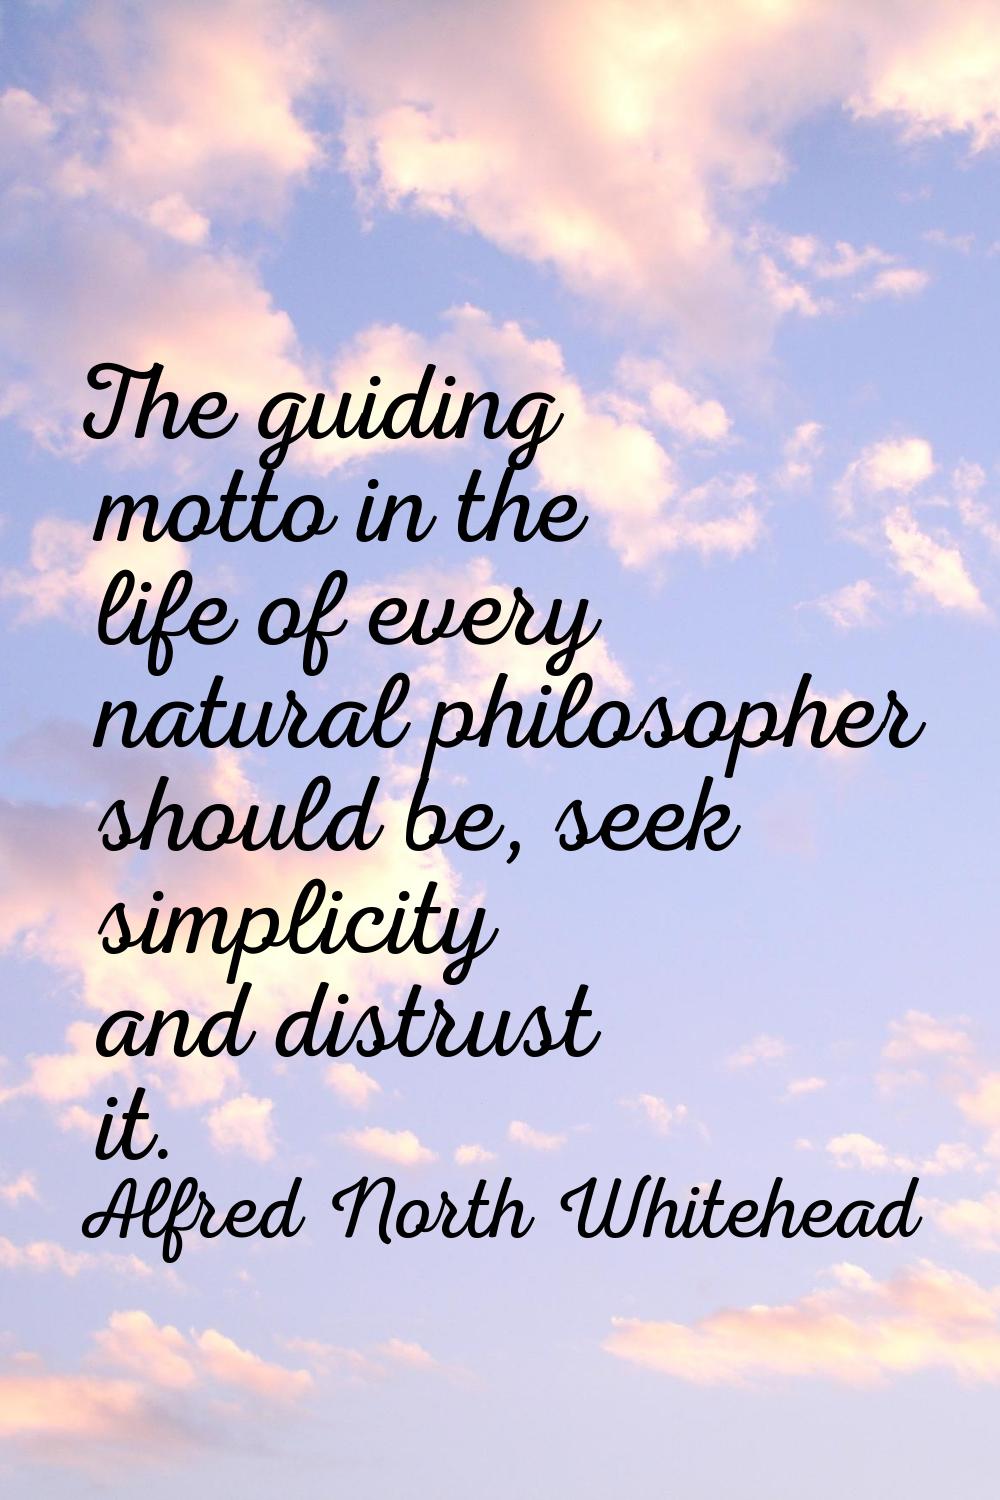 The guiding motto in the life of every natural philosopher should be, seek simplicity and distrust 